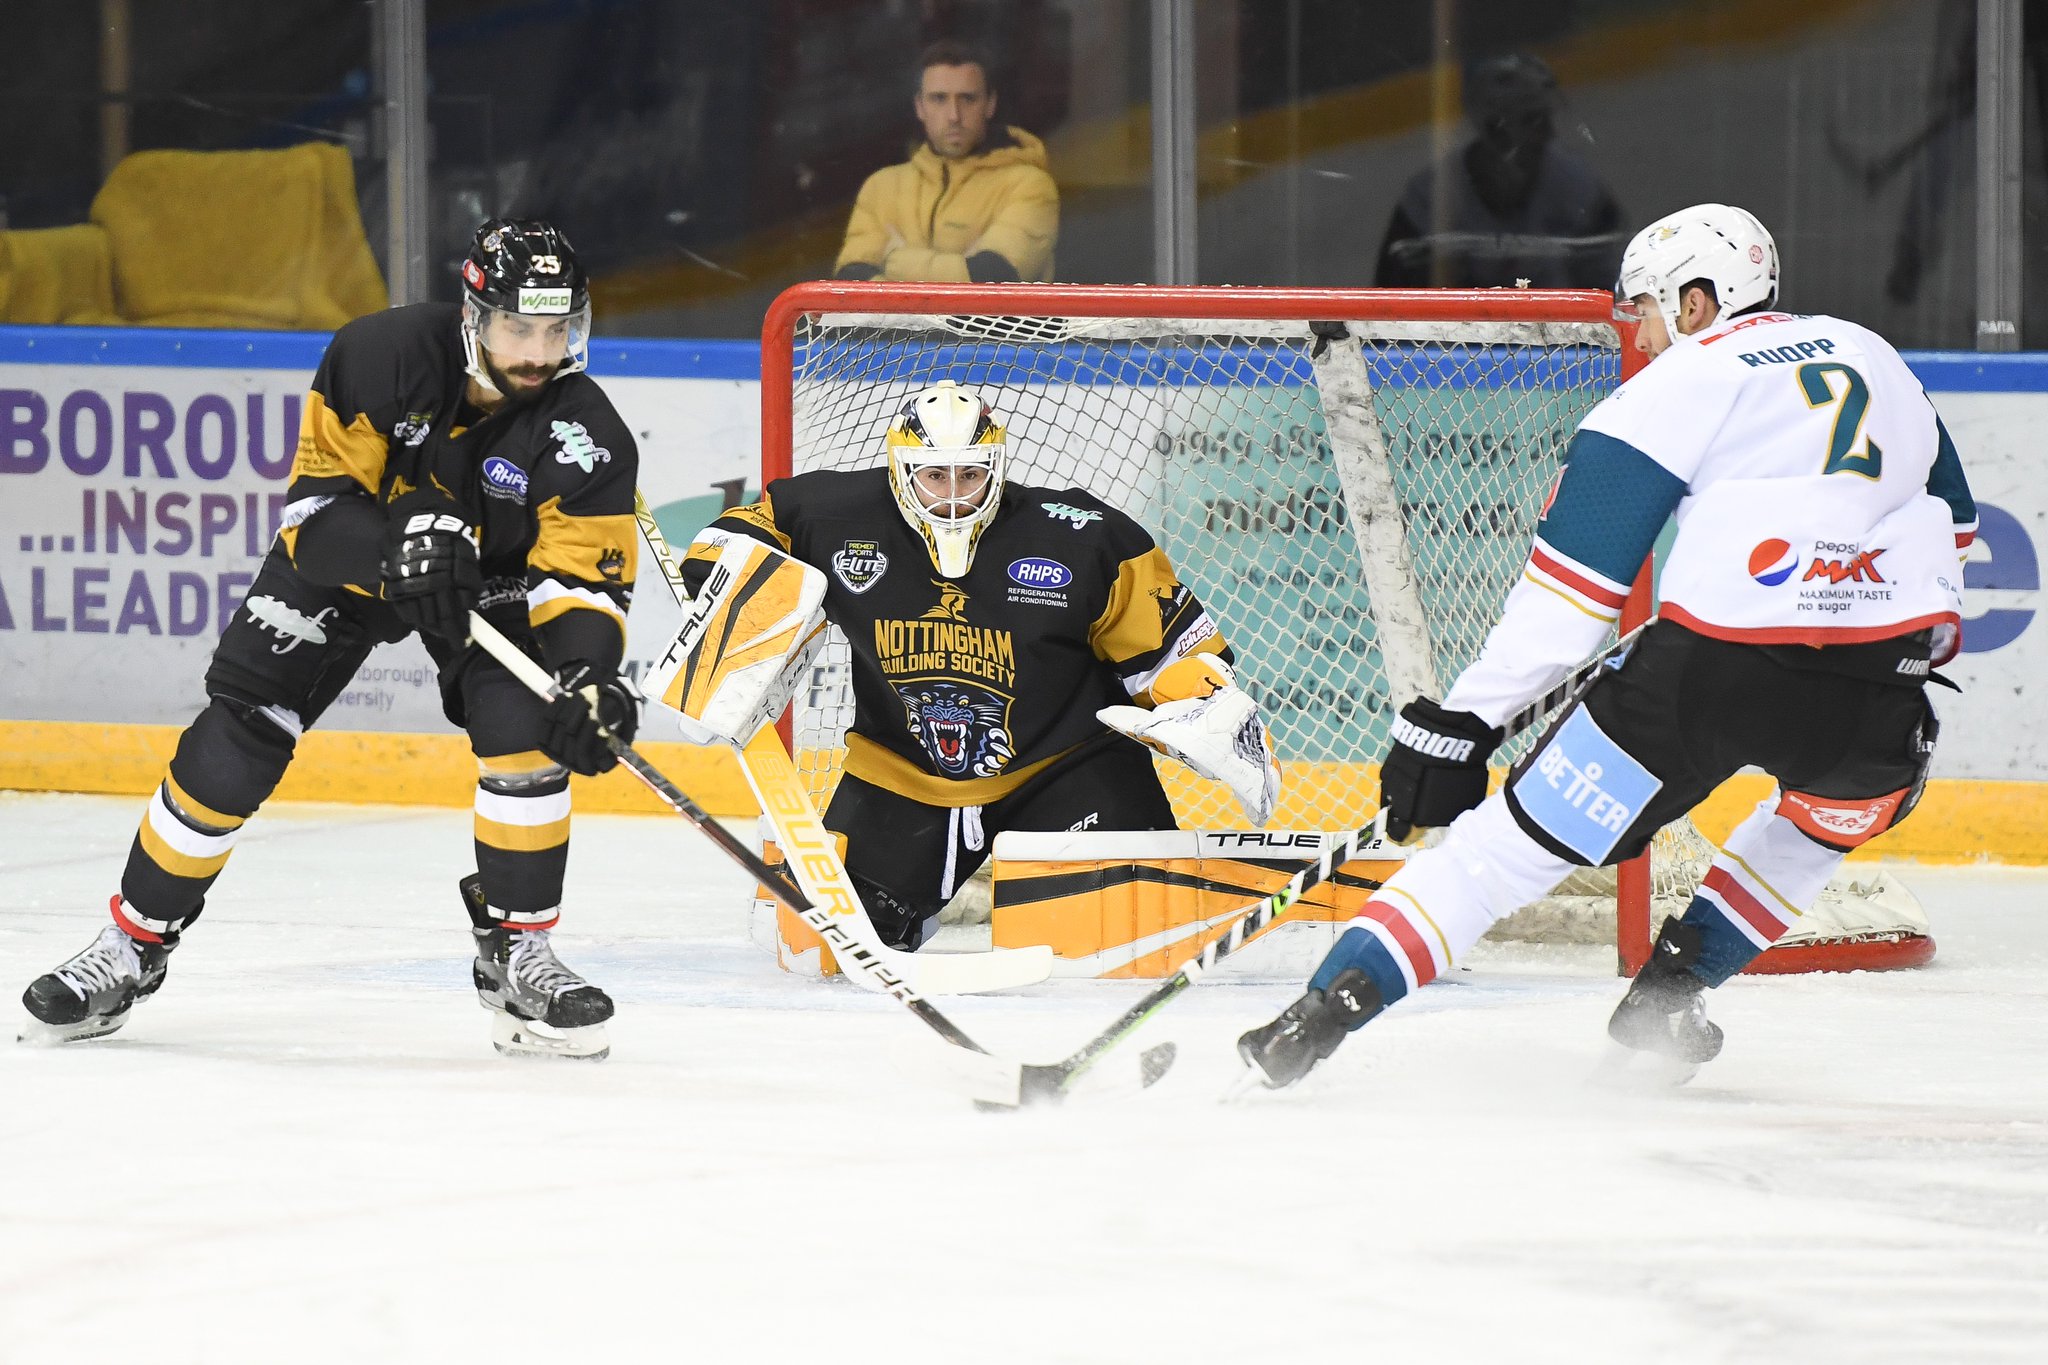 BELFAST NEXT AT HOME FOR THE PANTHERS Top Image